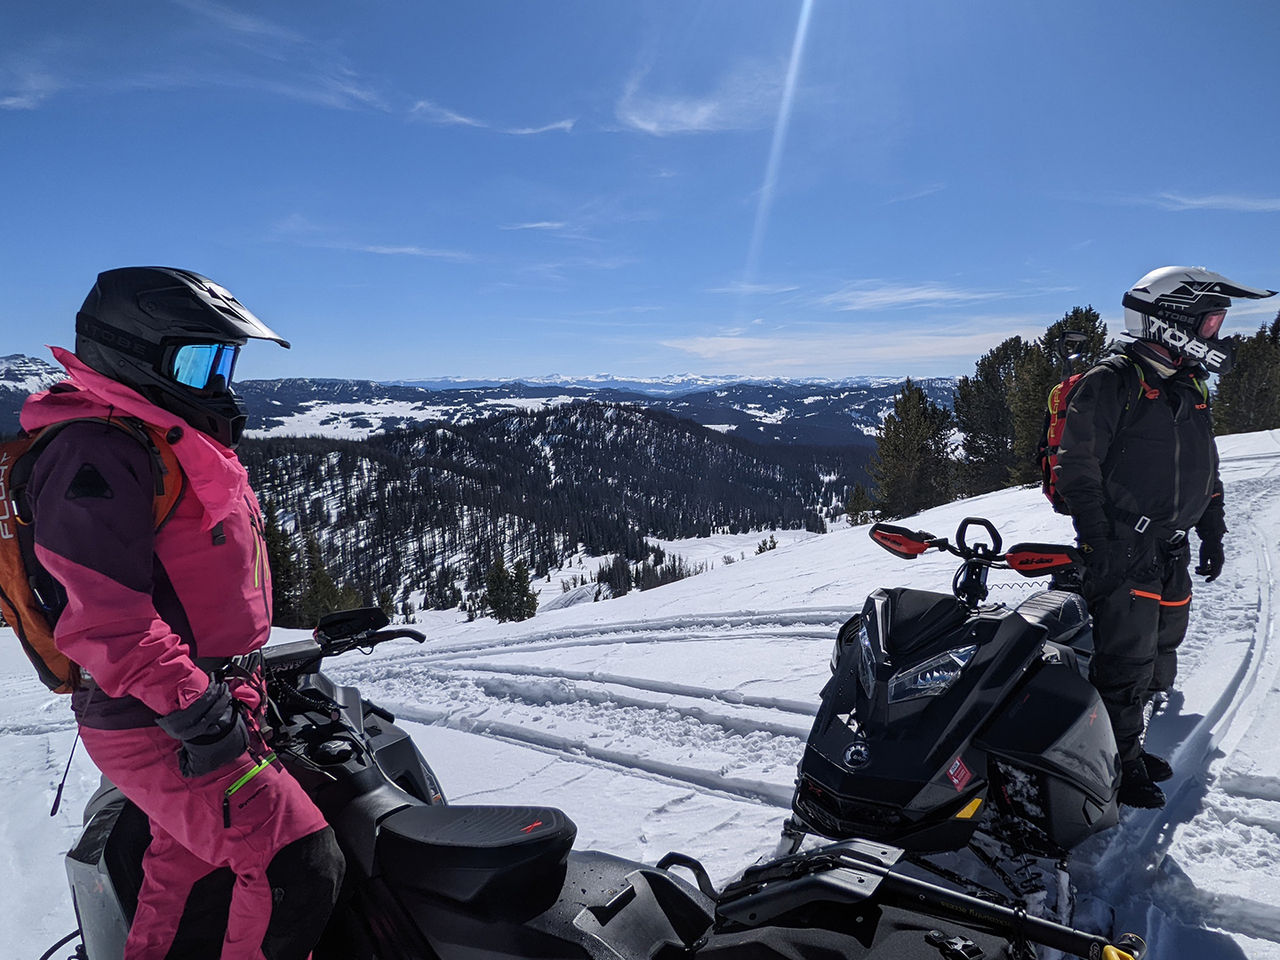 Pure Ski-Doo bliss in the backcountry of Laramie, WY